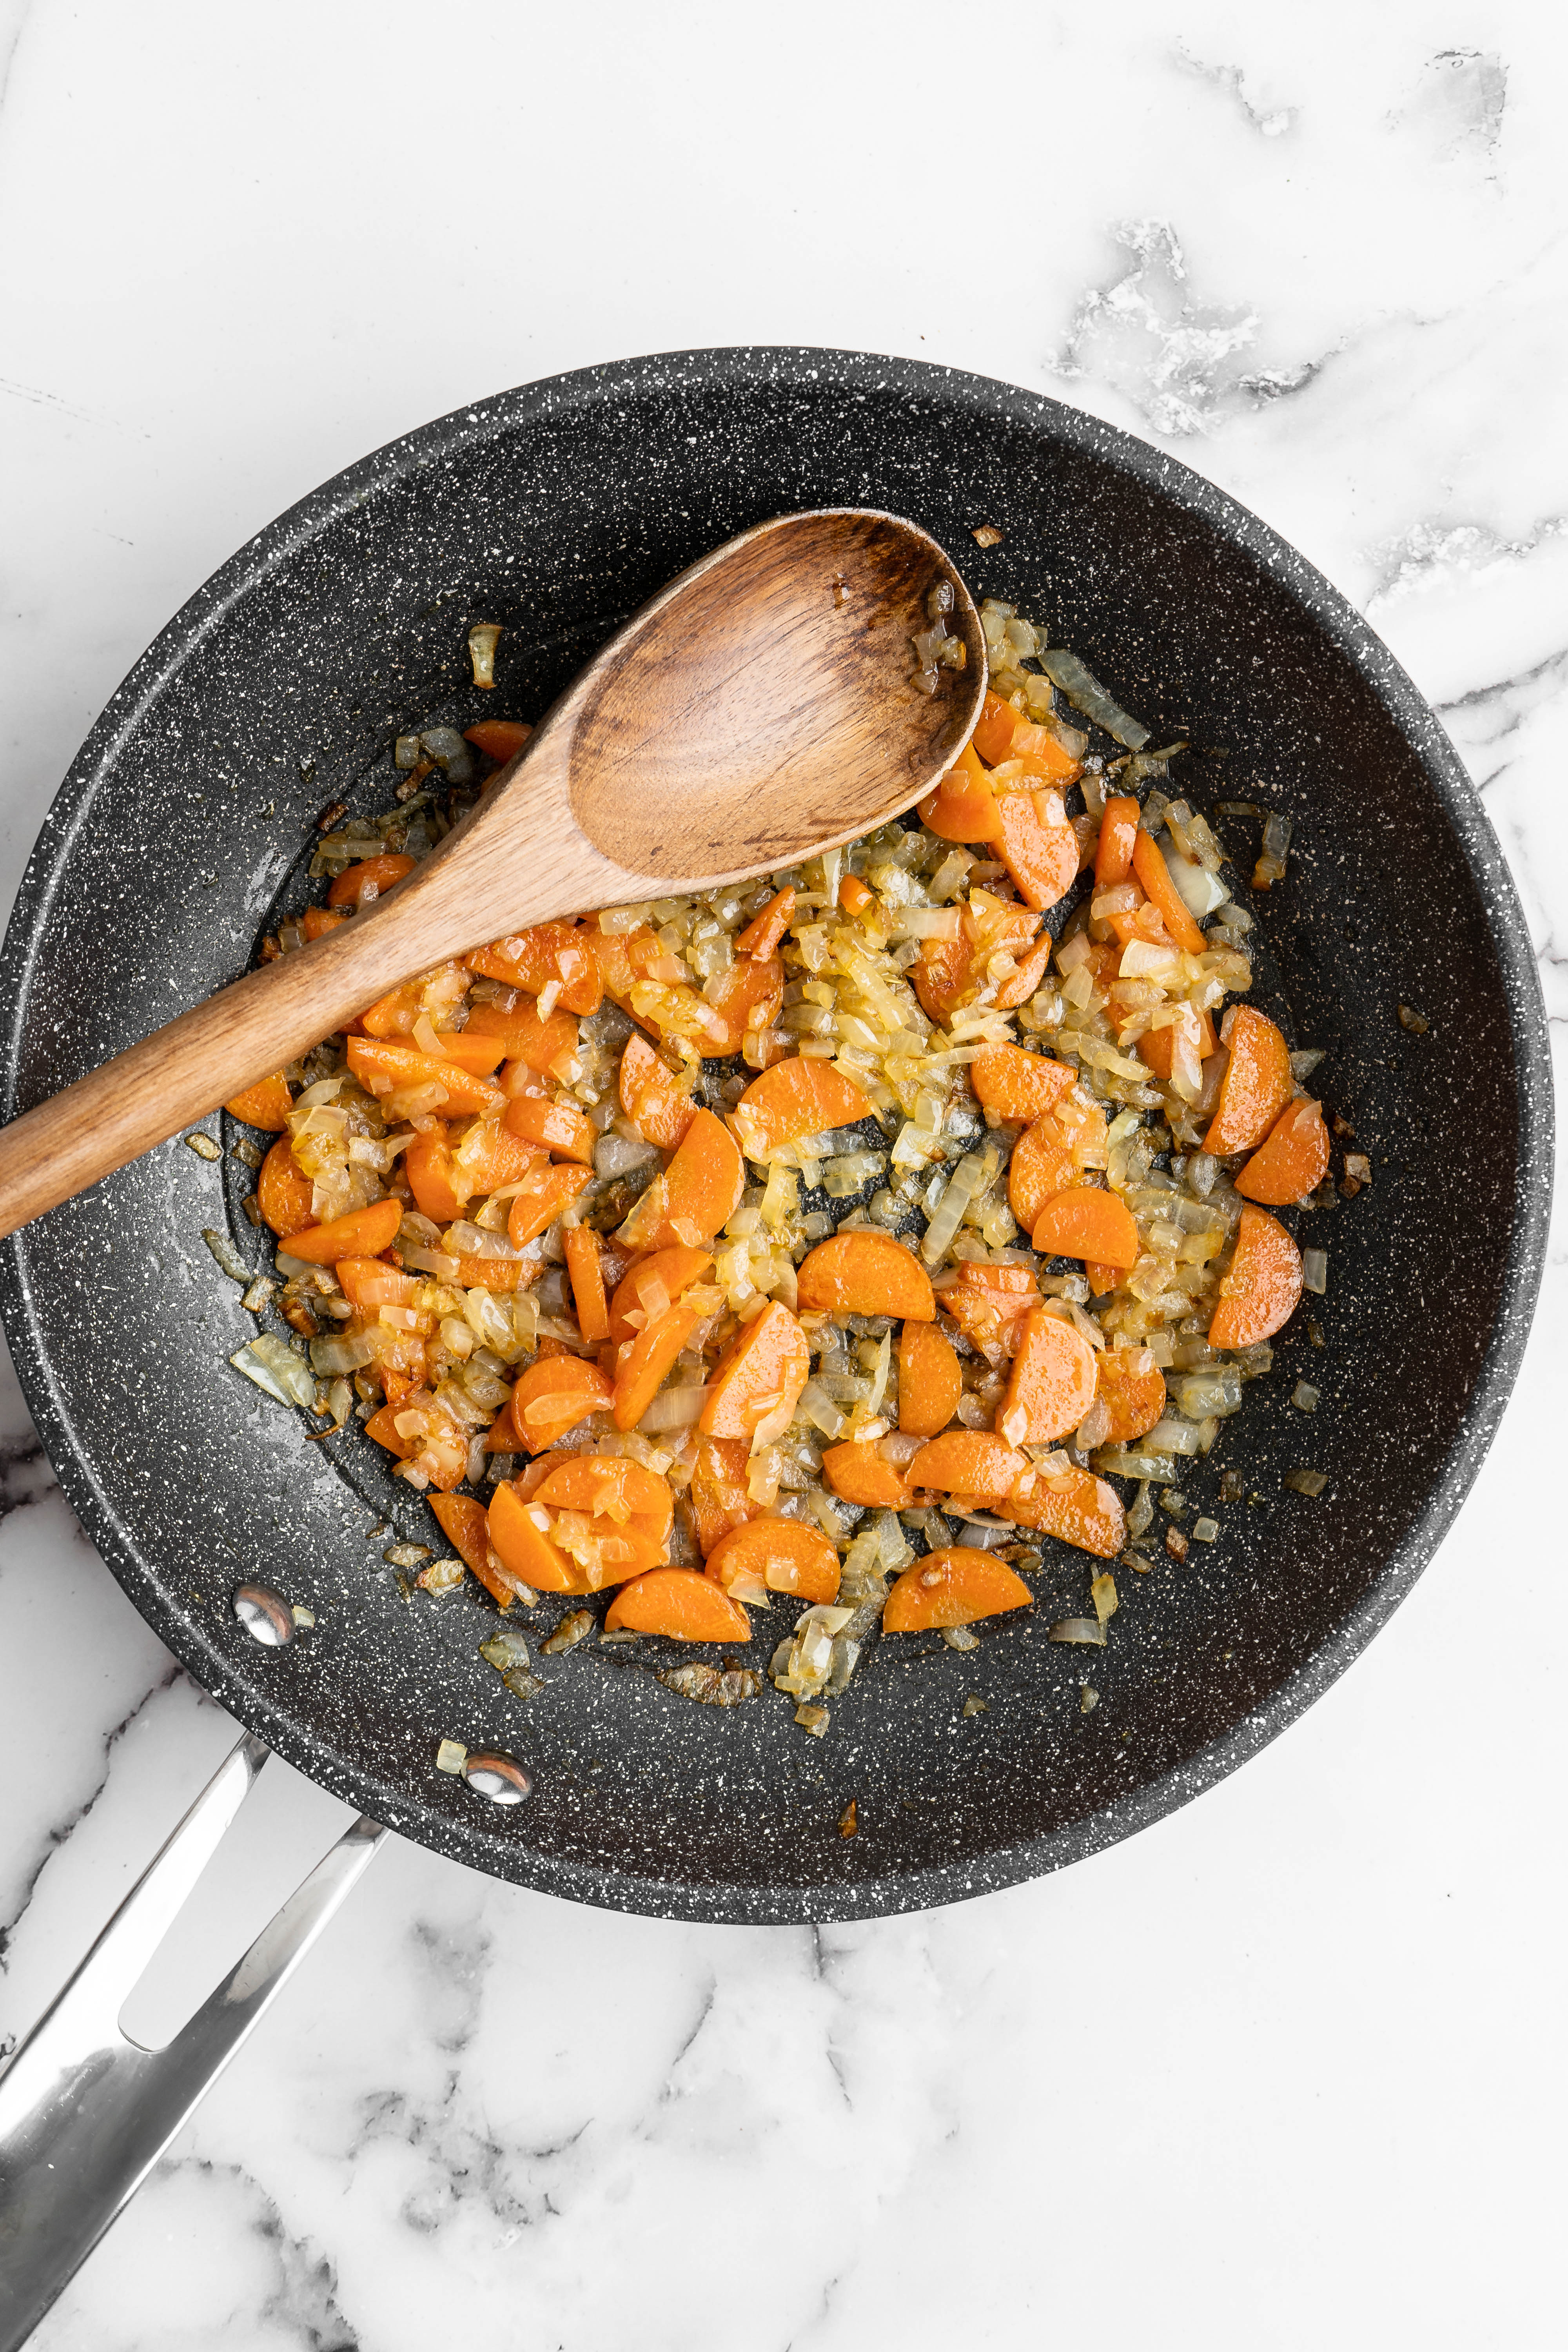 Overhead view of cooked carrots and onions in skillet